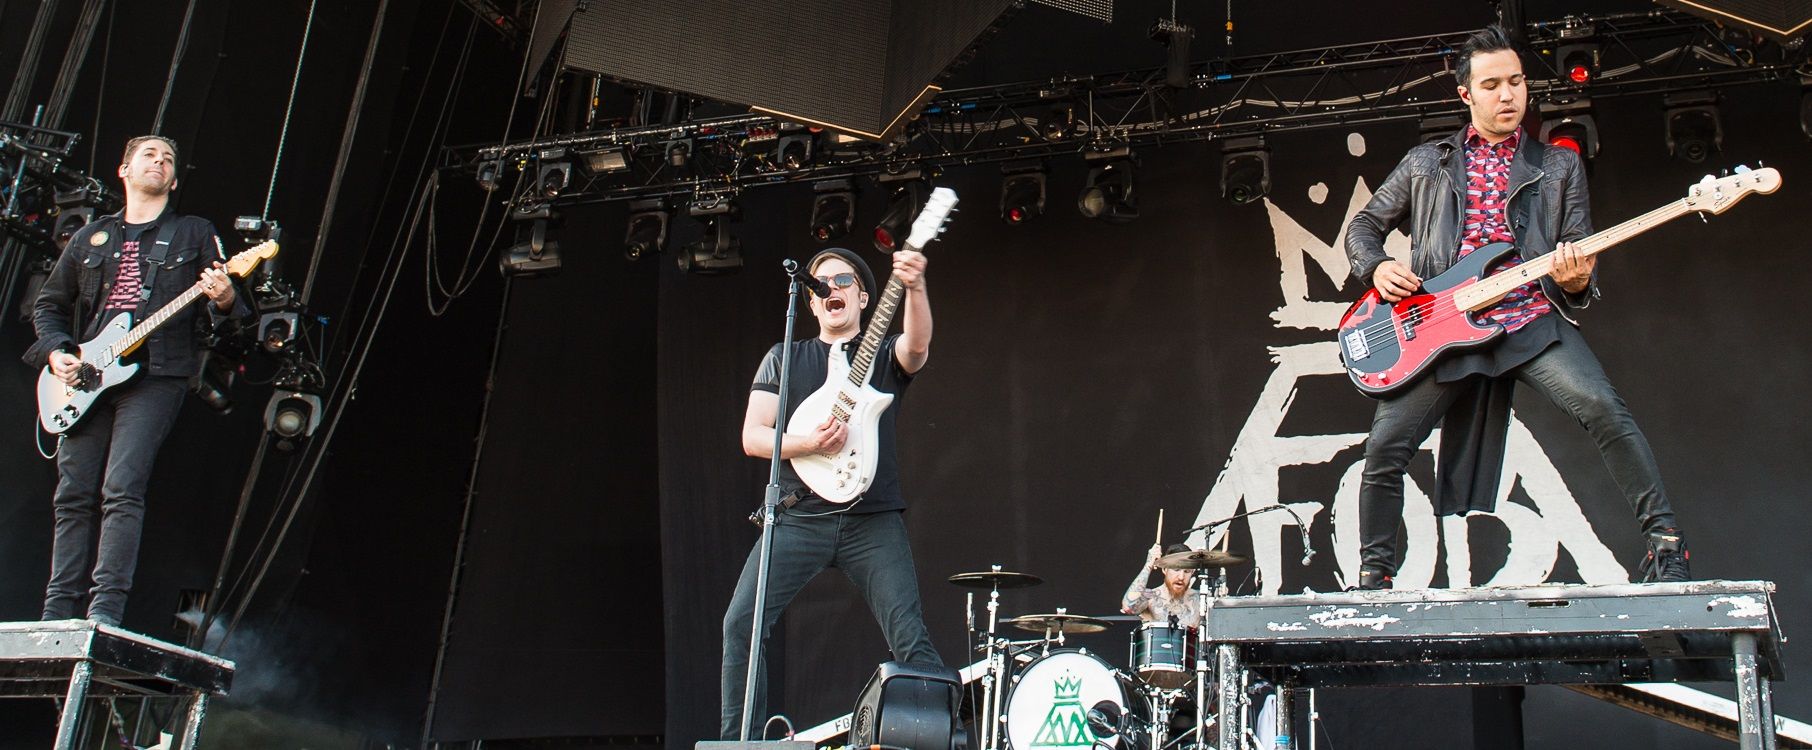 Fall Out Boy performing in 2014. Photo by Stefan Brending via Wikimedia Commons.